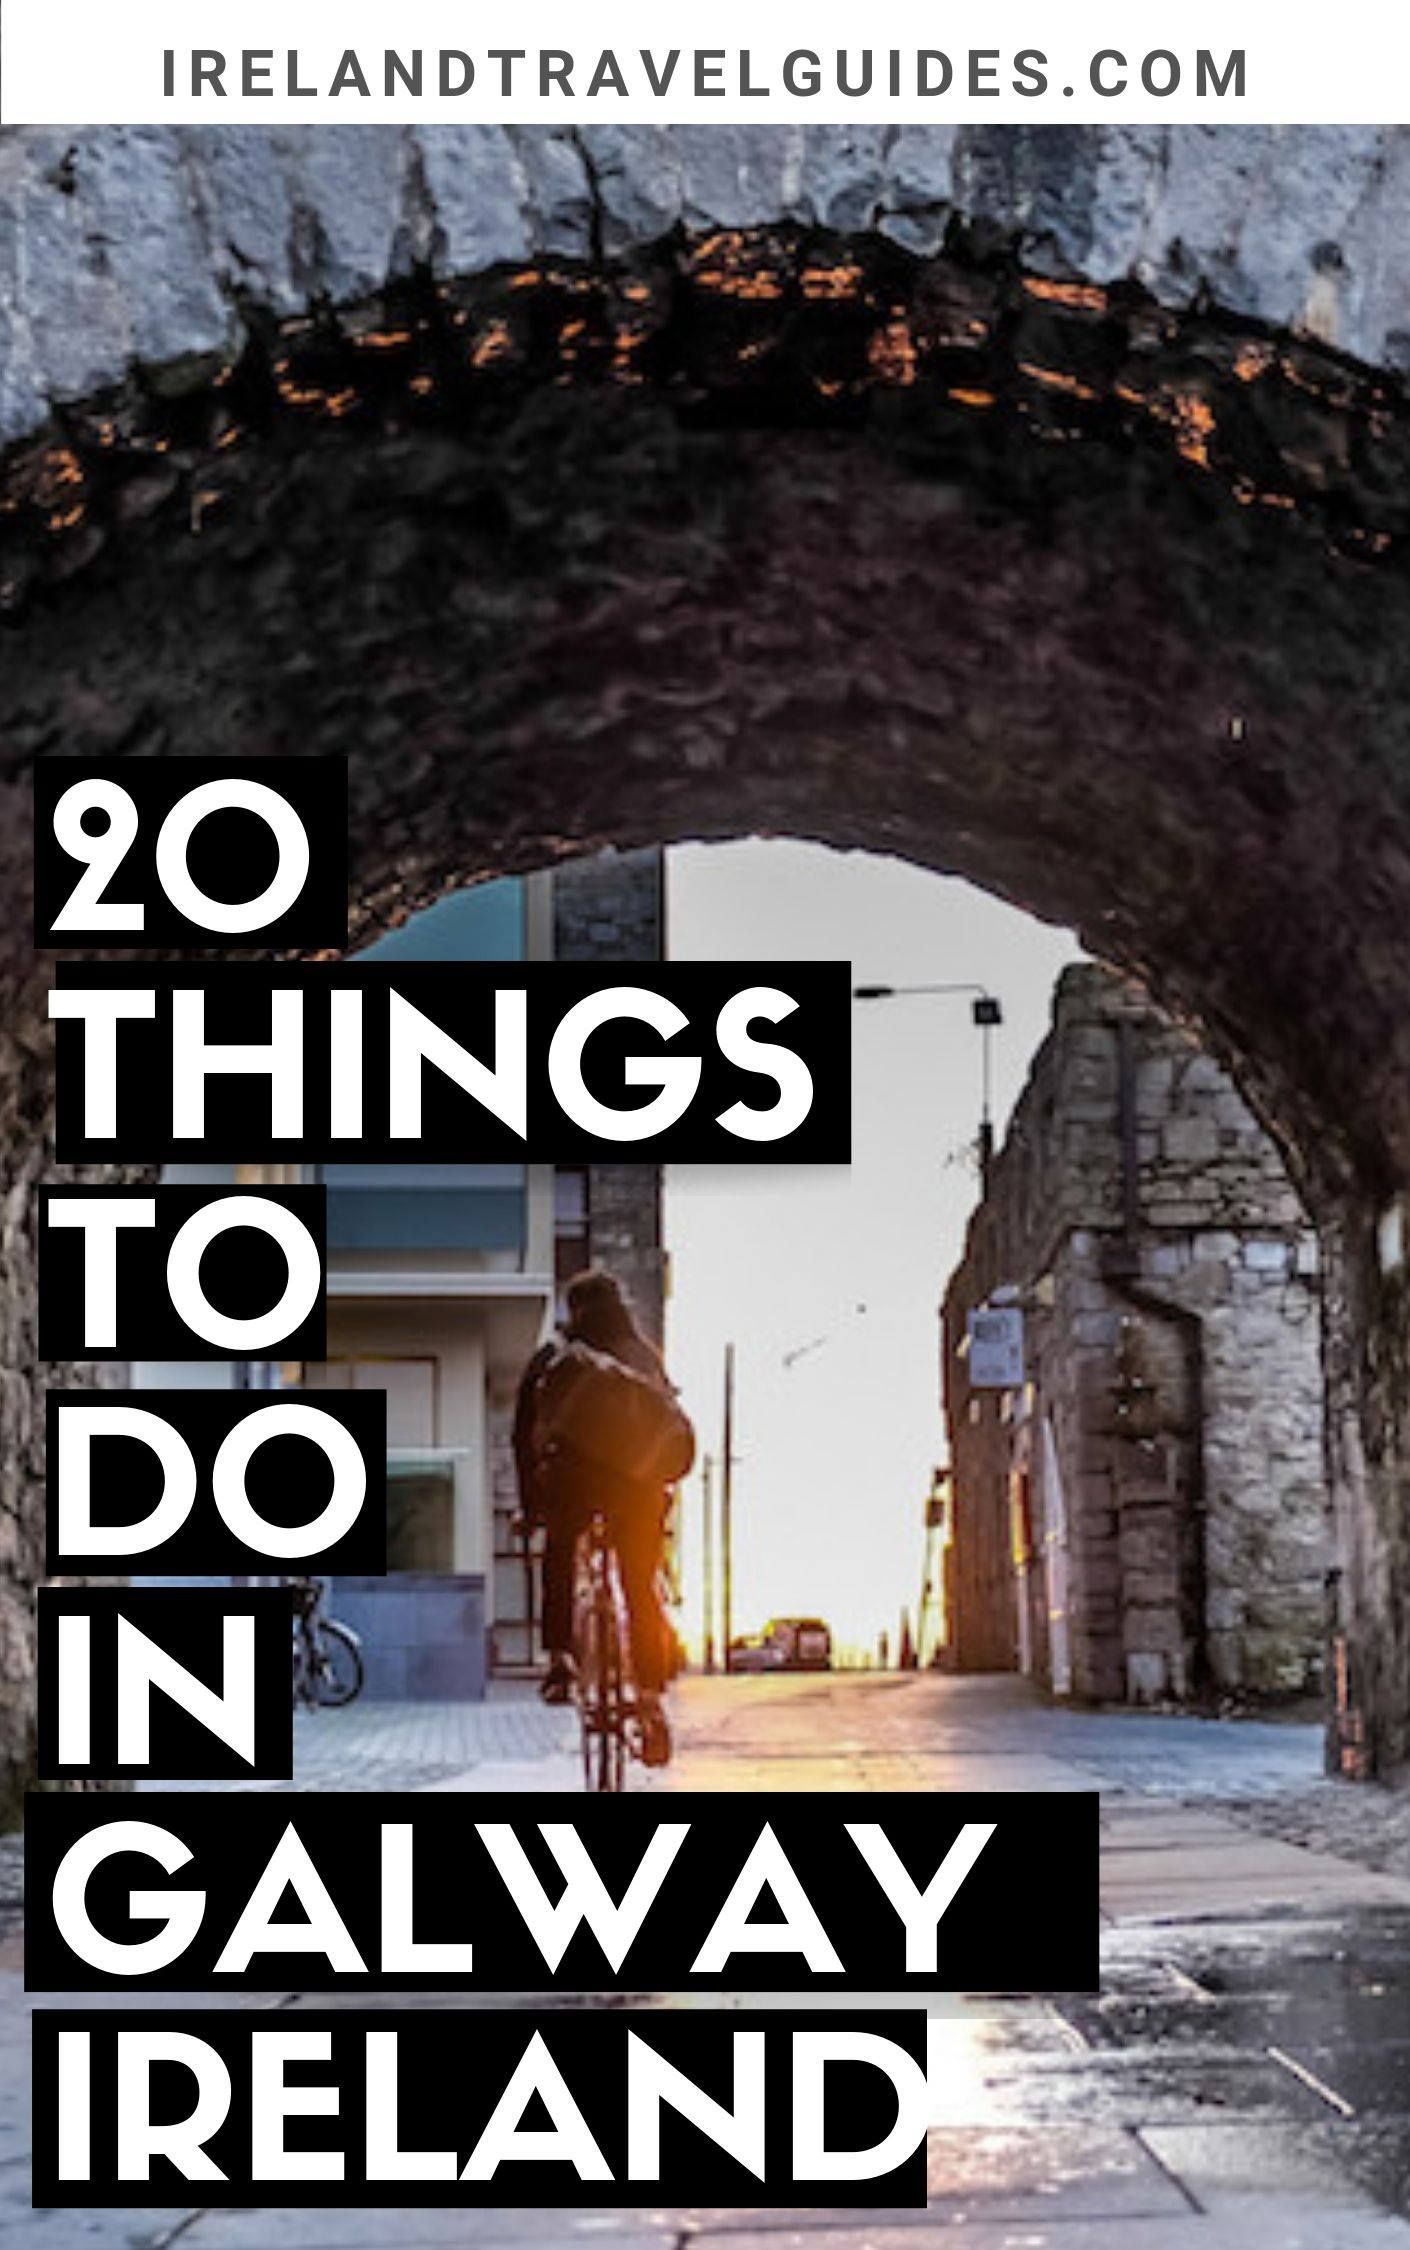 20 Things To Do In Galway Ireland -   16 travel destinations Scotland northern ireland ideas